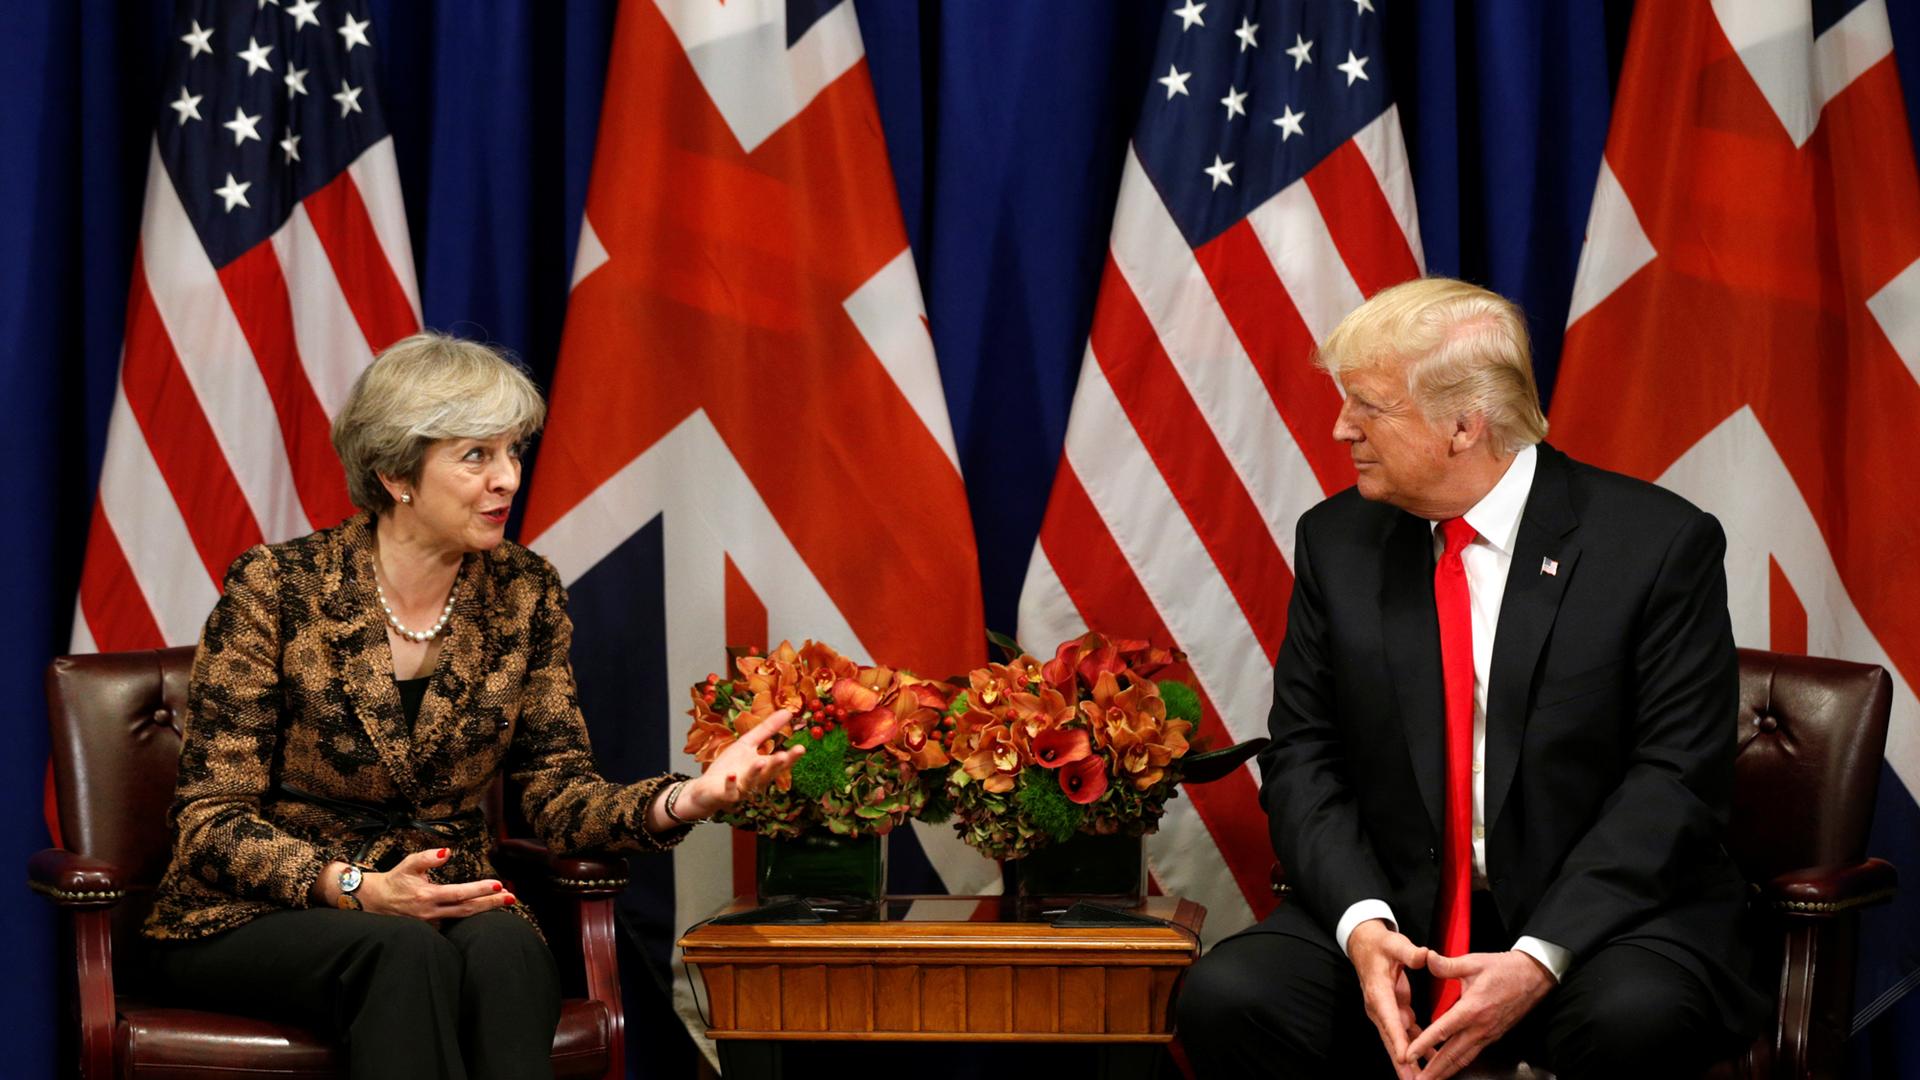 President Donald Trump sits across from Prime Minister Theresa in front of US and British flags.